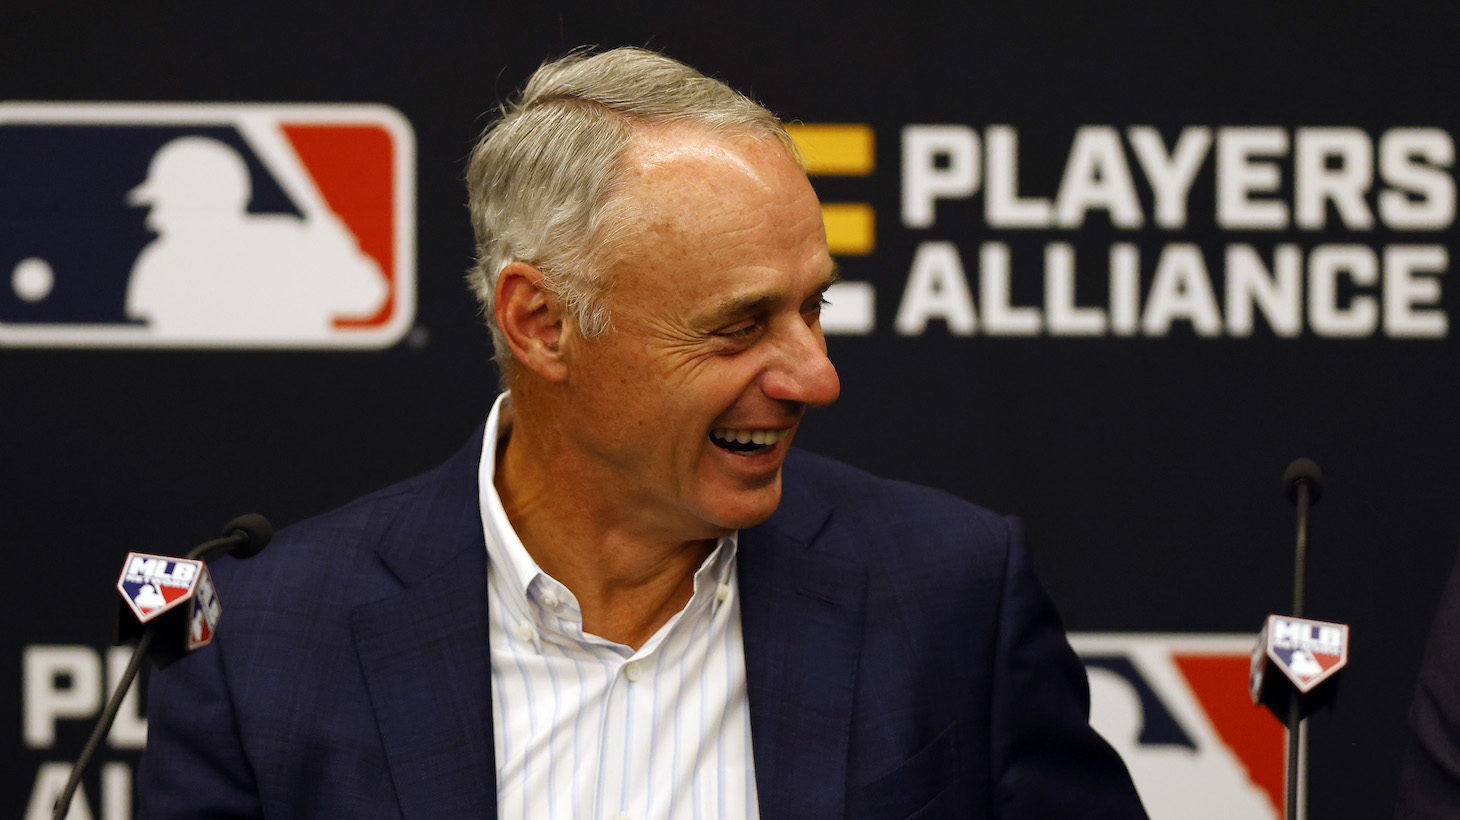 DENVER, COLORADO - JULY 12: Commissioner of Baseball Robert D. Manfred Jr. speaks during a press conference announcing a partnership with the Players Alliance during the Gatorade All-Star Workout Day at Coors Field on July 12, 2021 in Denver, Colorado. (Photo by Justin Edmonds/Getty Images)